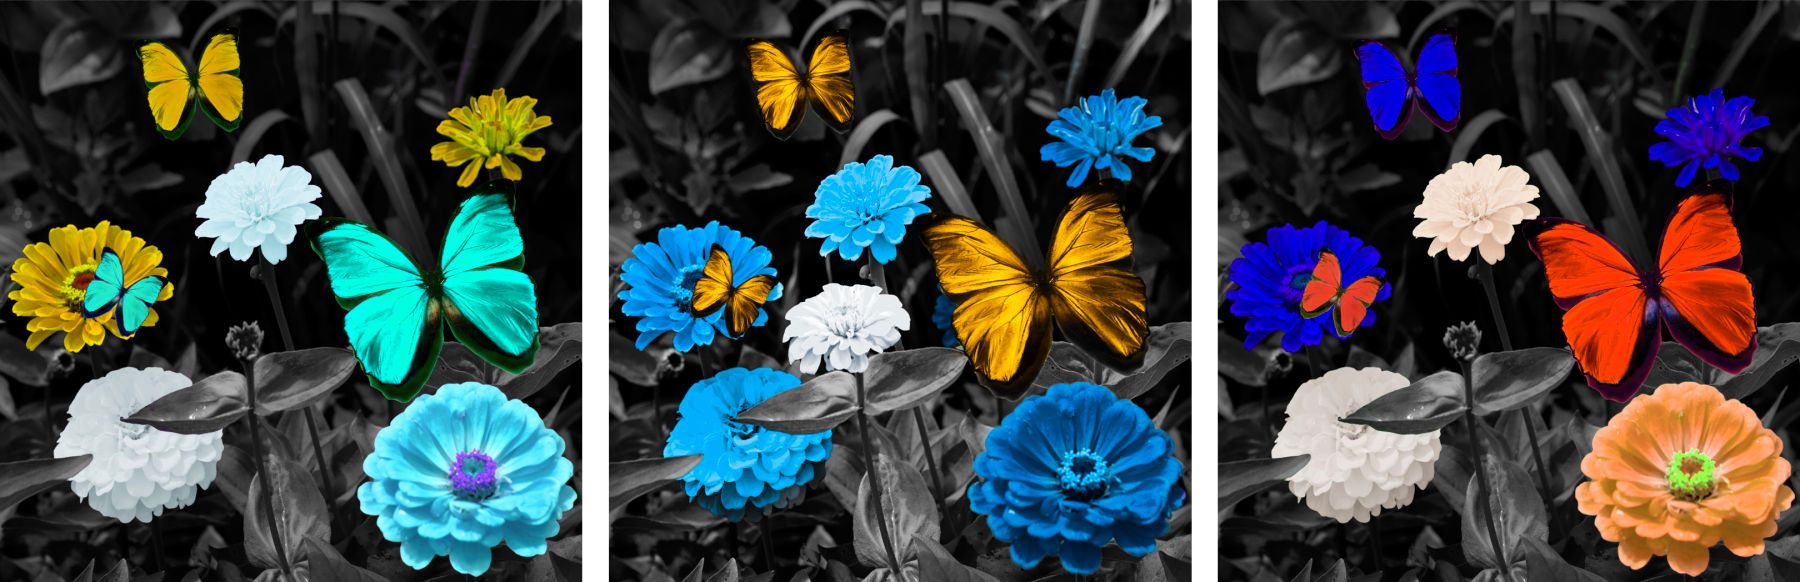 BW Colorful Butterfly Meadow Triptych   